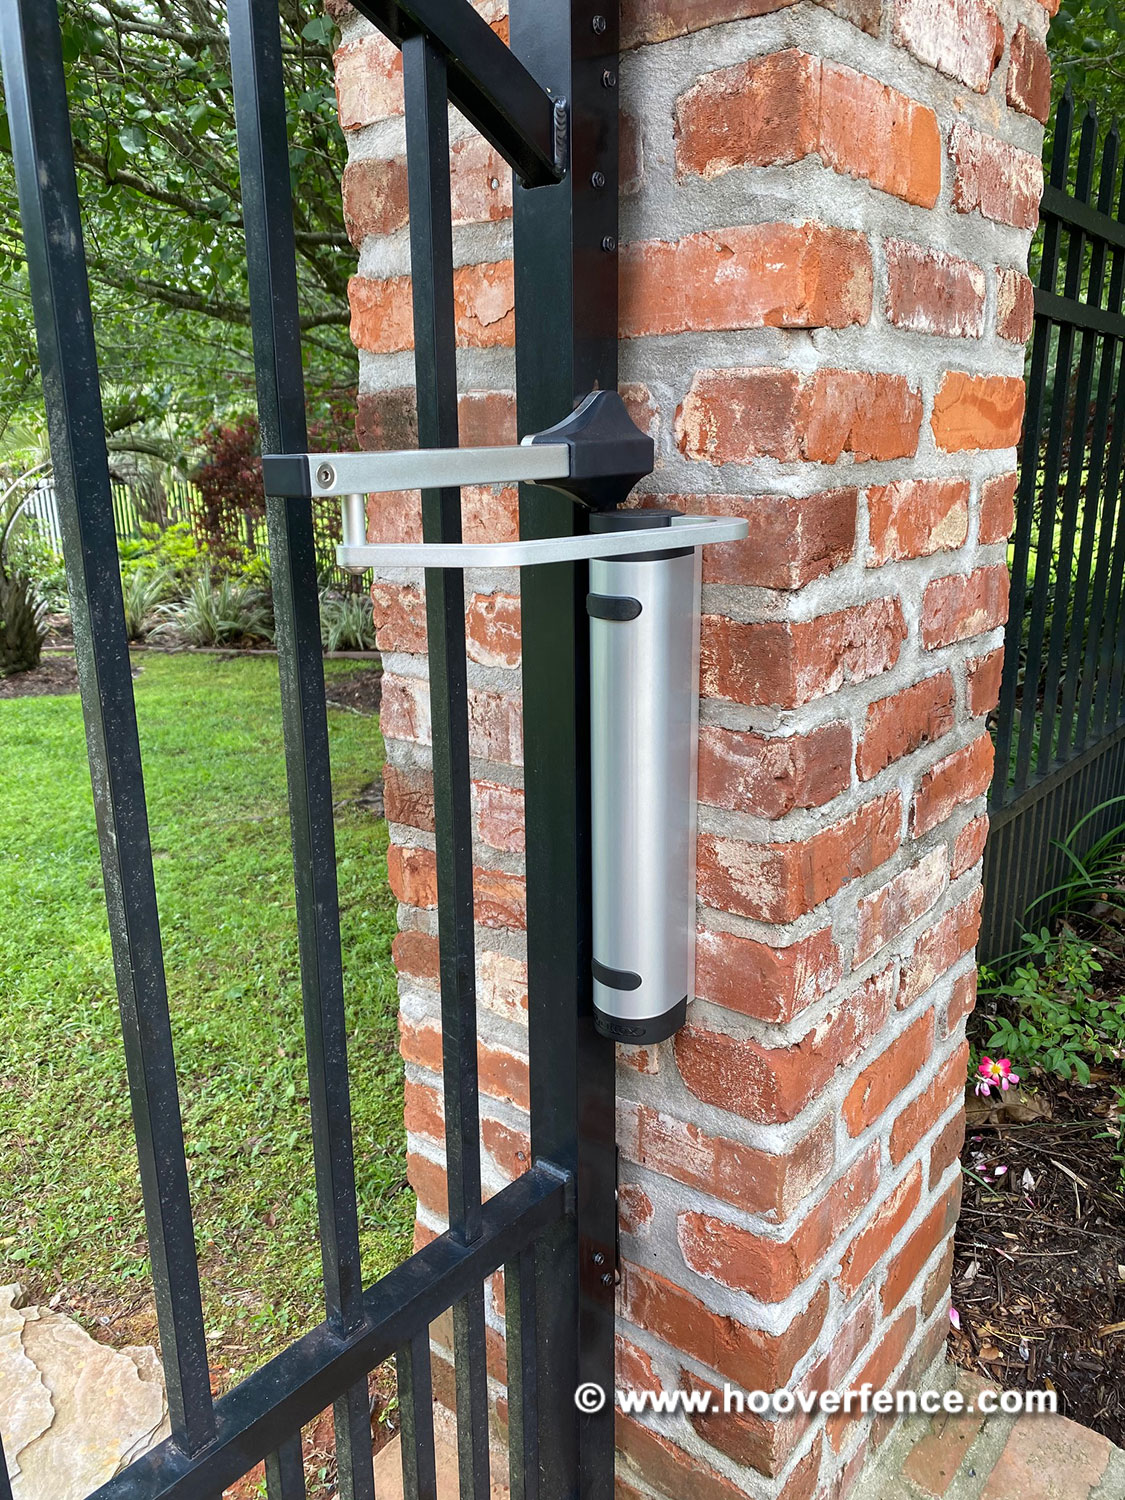 Customer Install - Locinox Verticlose-2-Wall Installed on Arched Metal Gate Mounted on Red Brick Columns - Baton Rouge, LA